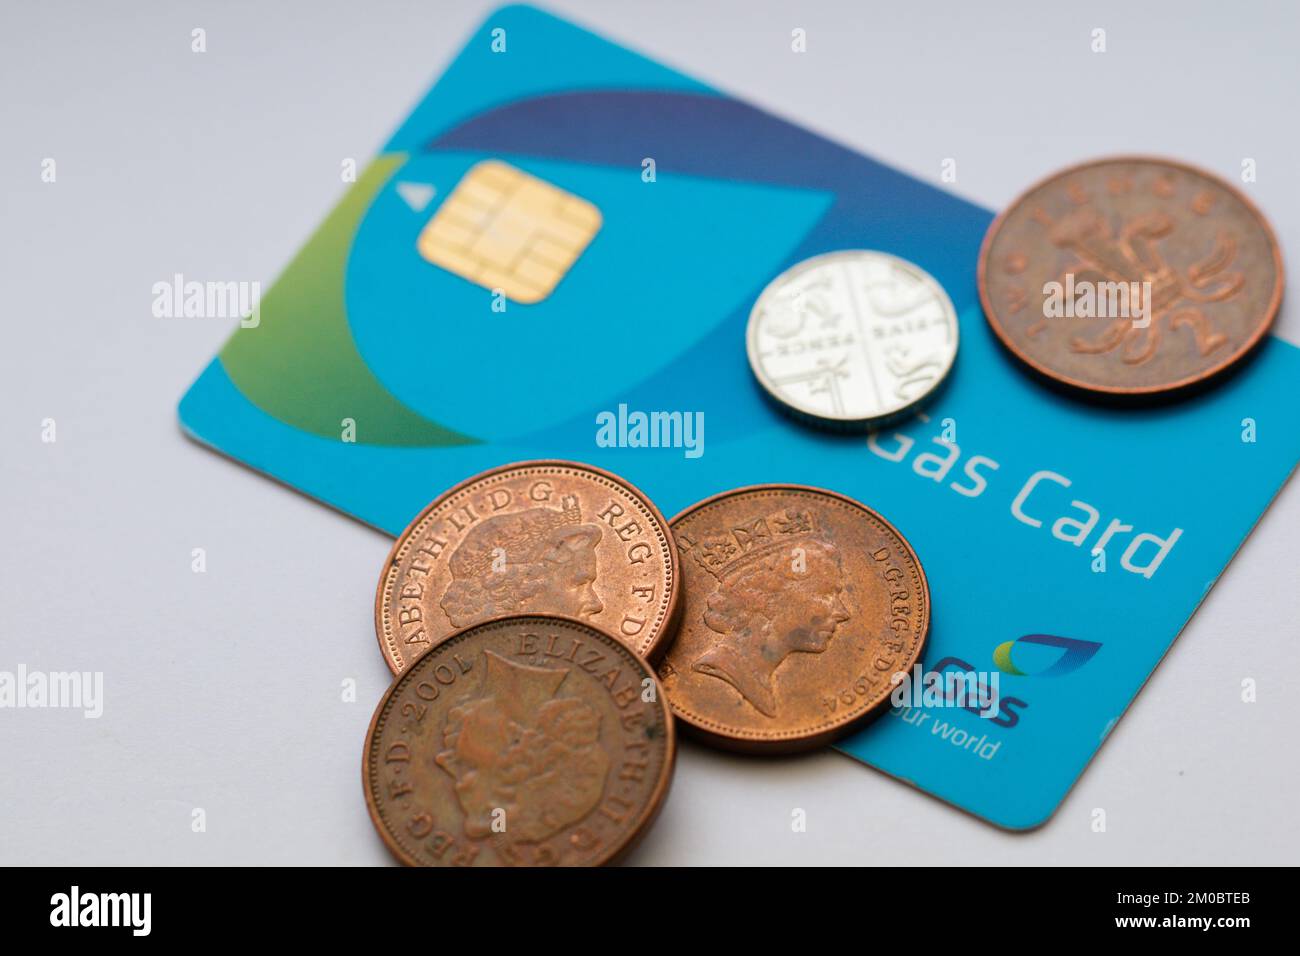 Energy Crisis / Rising Prices / Fuel Poverty - Close-up of a Gas Pre-payment card and British Coins Stock Photo